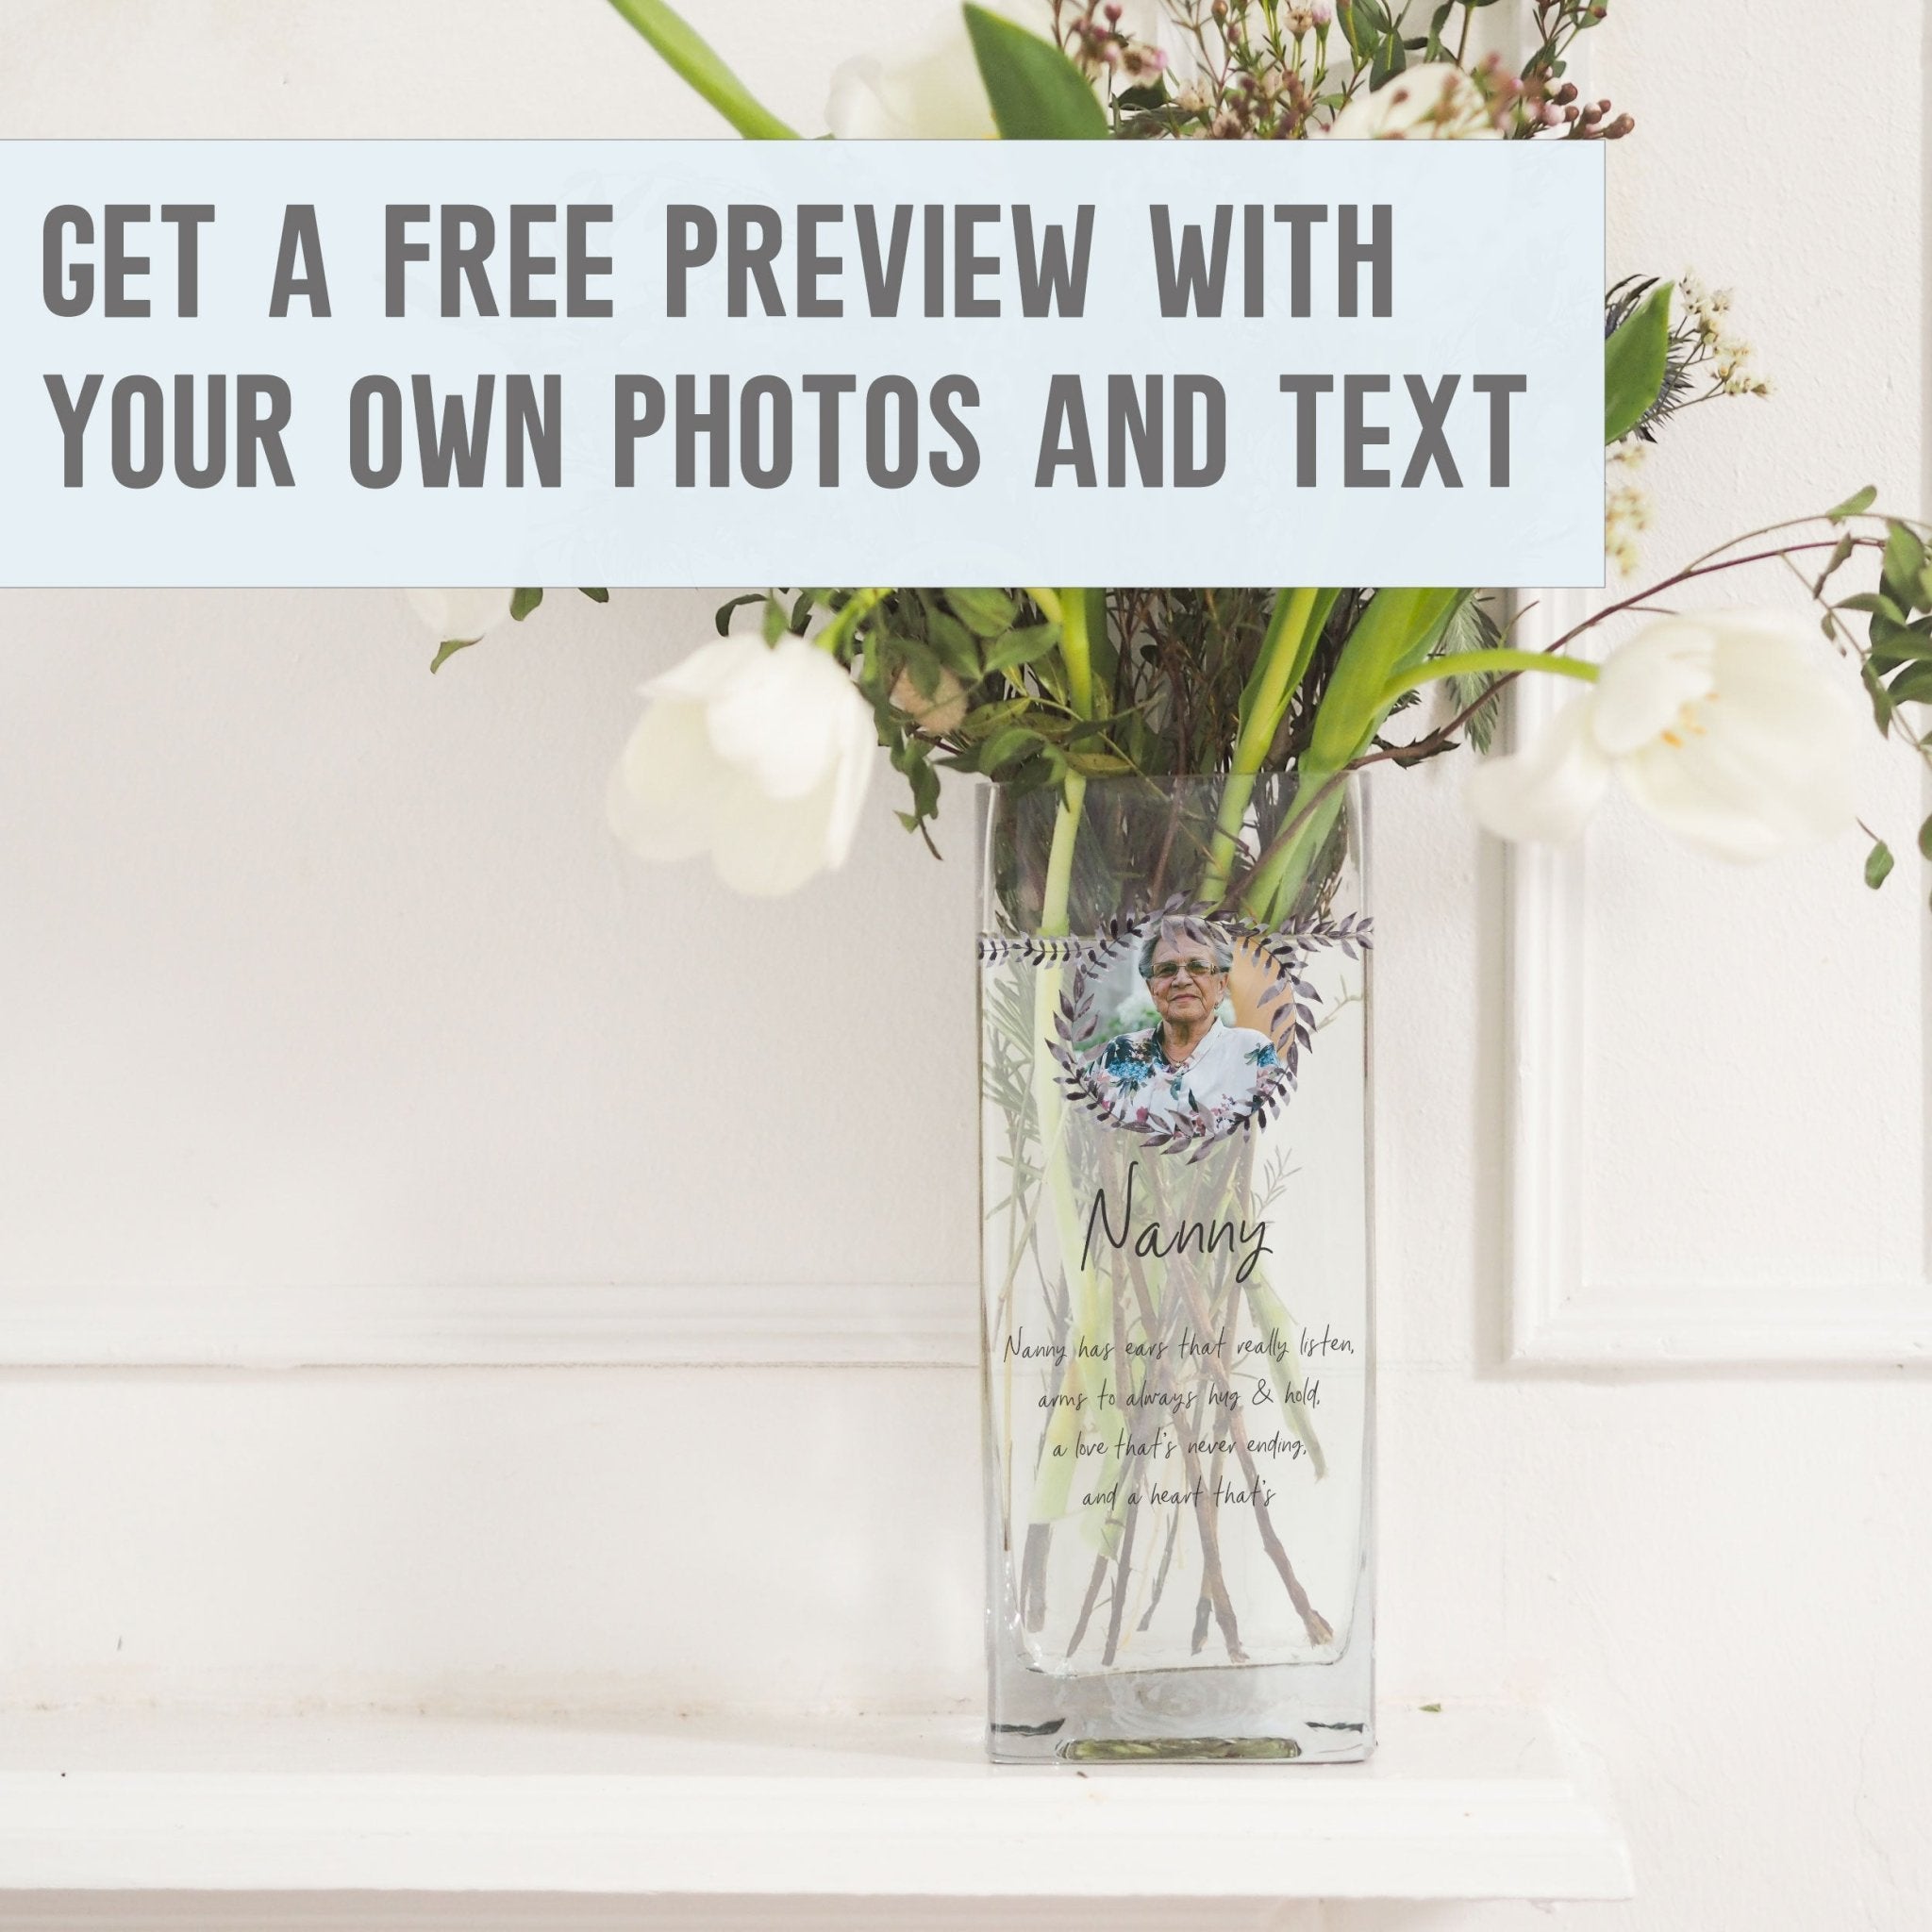 Nanny Quotes Custom Photo Glass Vase | Rustic Wreath Nursemaid Gift Idea | Personalized Flower Stand with Picture, Home Decor Present Vase - Unique Prints